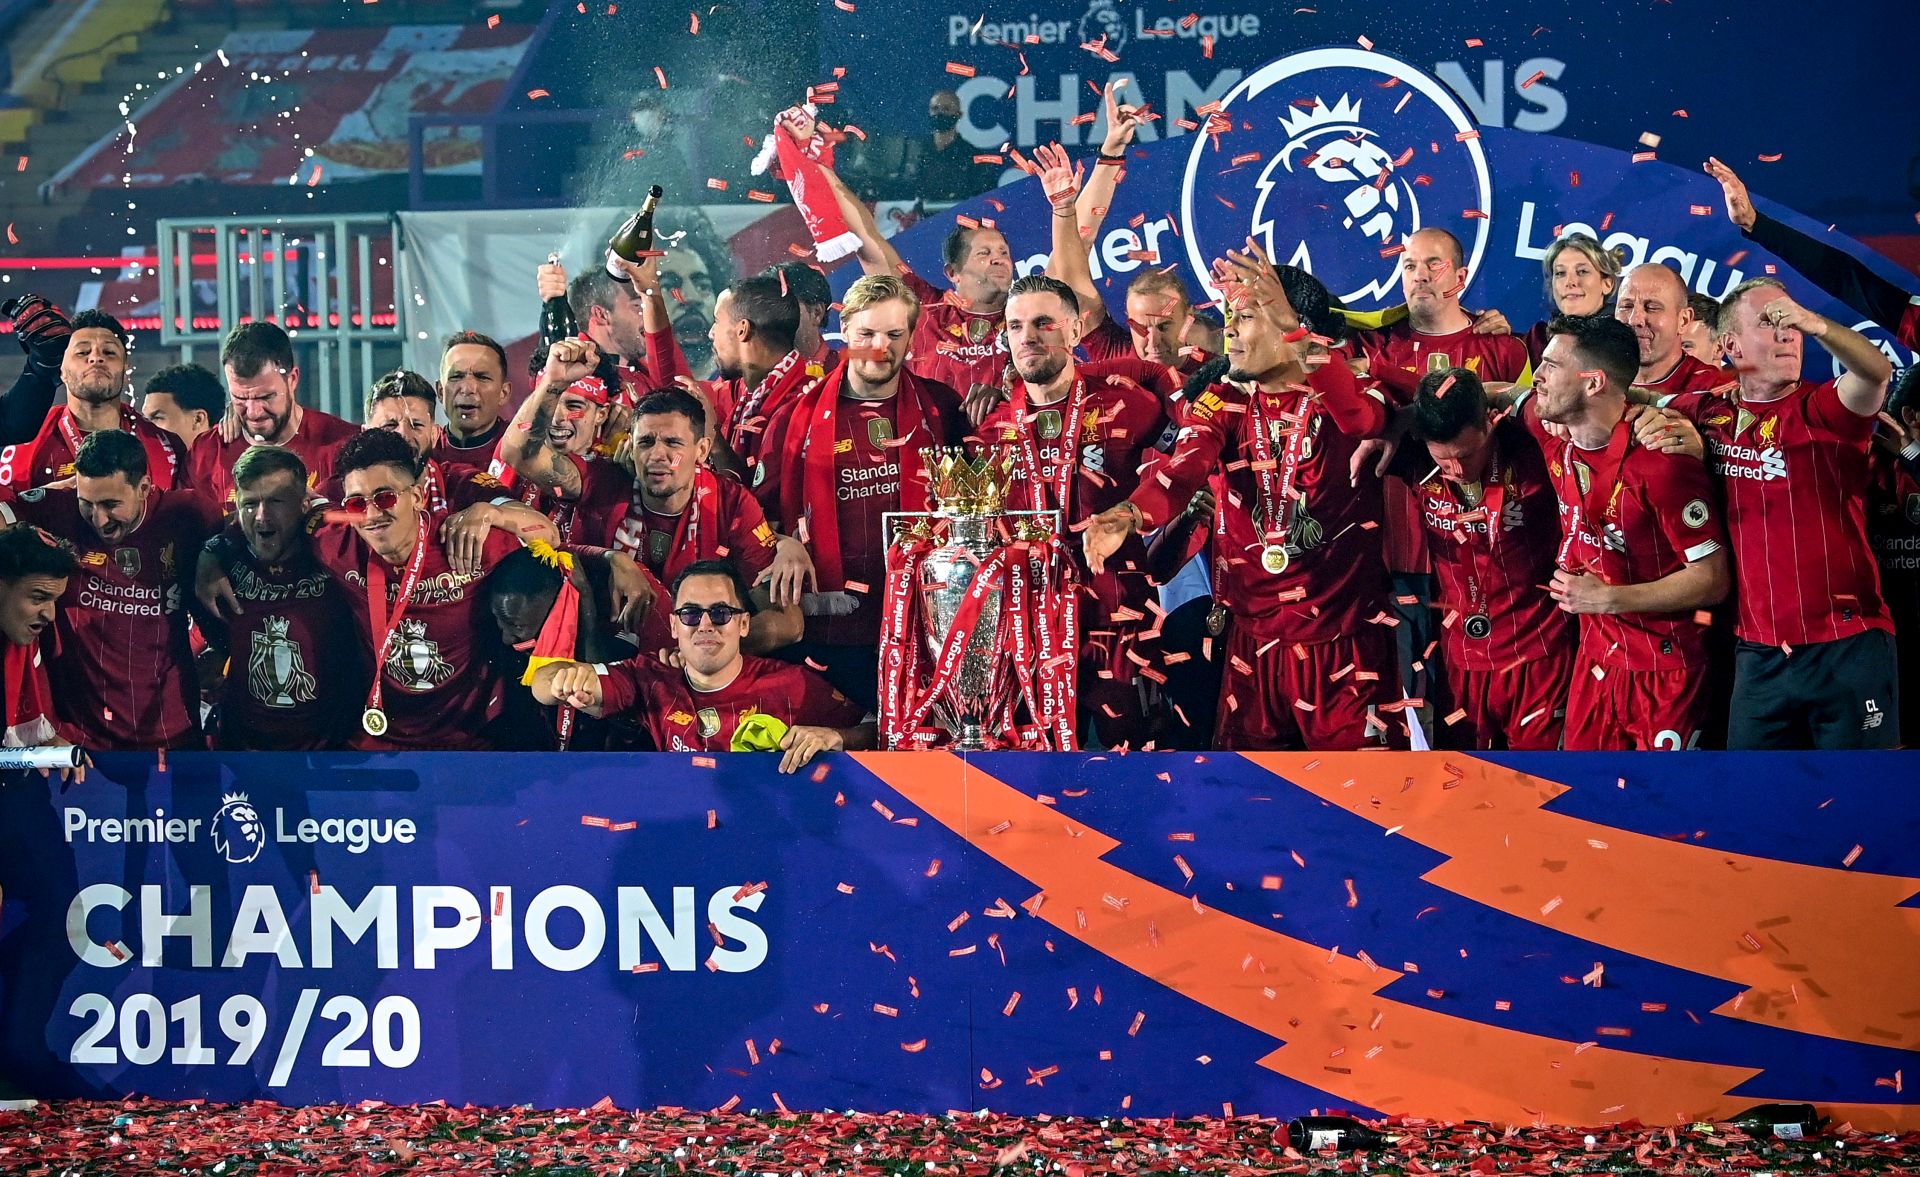 epa08561412 The team of Liverpool poses with the Premier League trophy following the English Premier League soccer match between Liverpool FC and Chelsea FC in Liverpool, Britain, 22 July 2020.  EPA/Paul Ellis/NMC/Pool EDITORIAL USE ONLY. No use with unauthorized audio, video, data, fixture lists, club/league logos or 'live' services. Online in-match use limited to 120 images, no video emulation. No use in betting, games or single club/league/player publications.